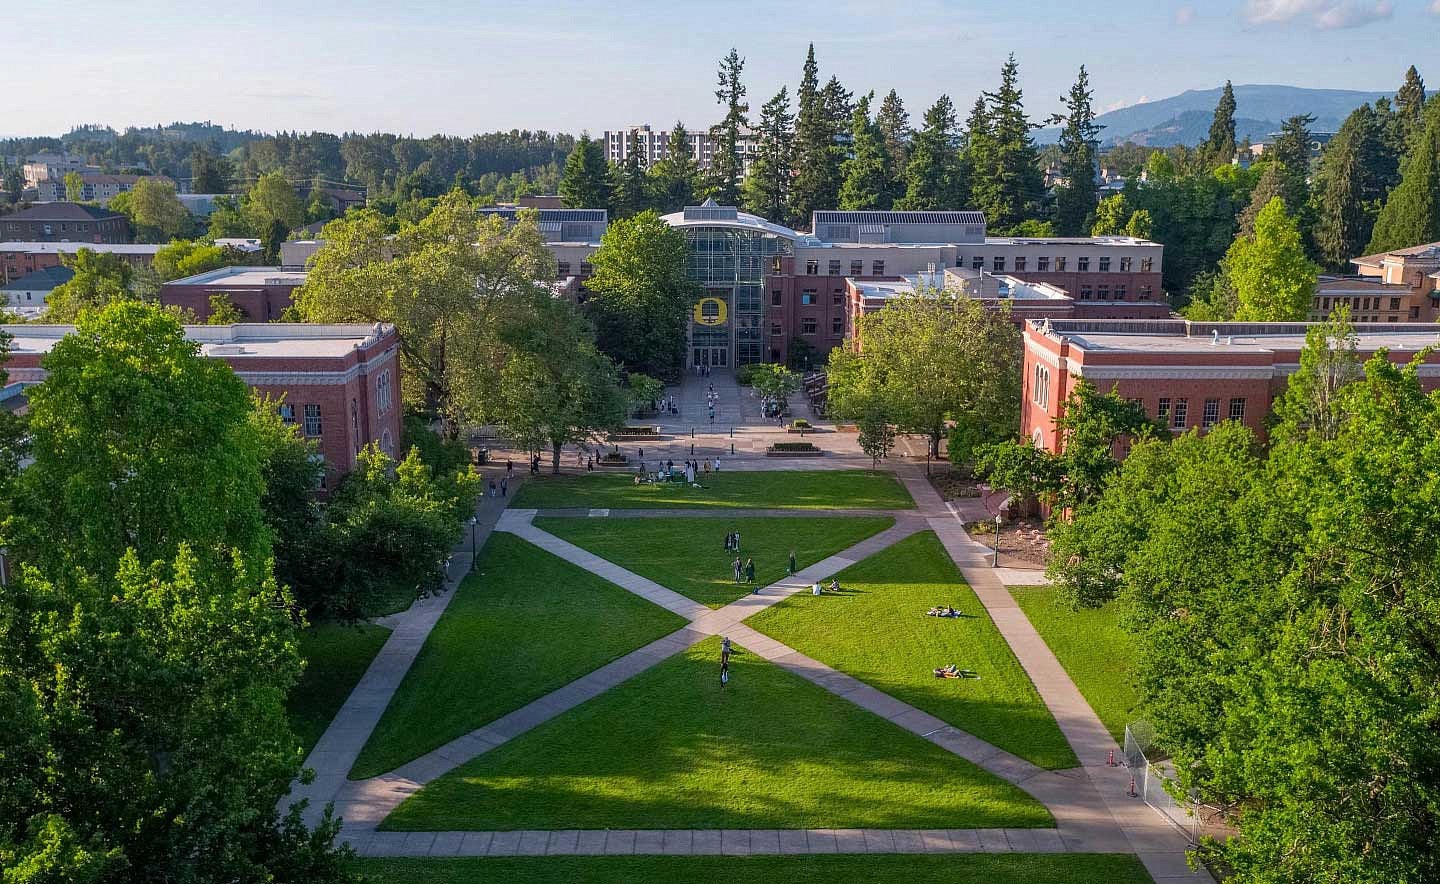 Aeriel view of a campus lawn with crossing walkways.